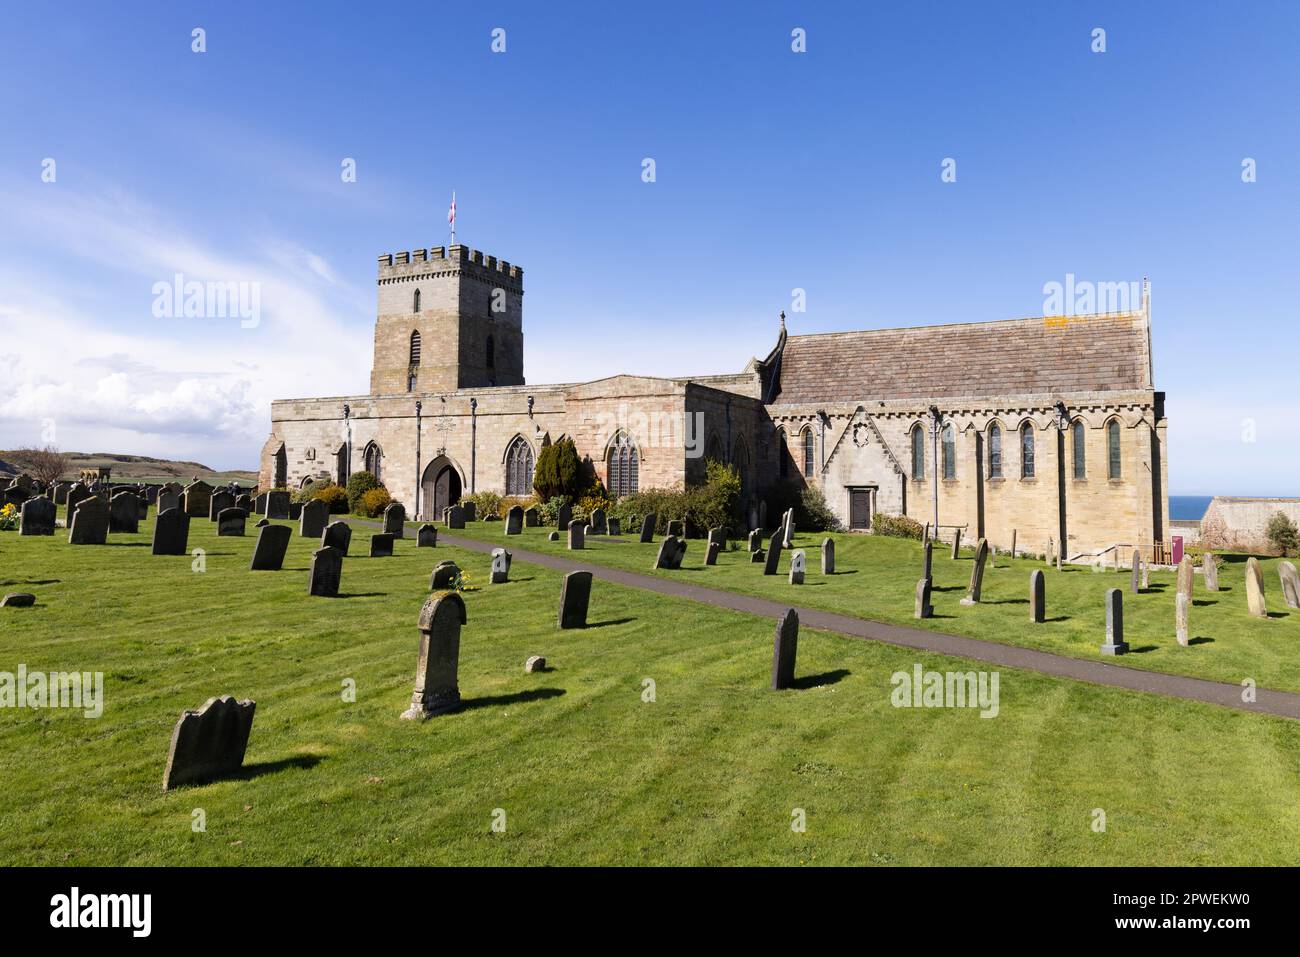 St Aidans Church Bamburgh Northumberland UK; exterior view on a sunny spring day with blue sky. Tomb of Grace Darling can be seen far left. Stock Photo